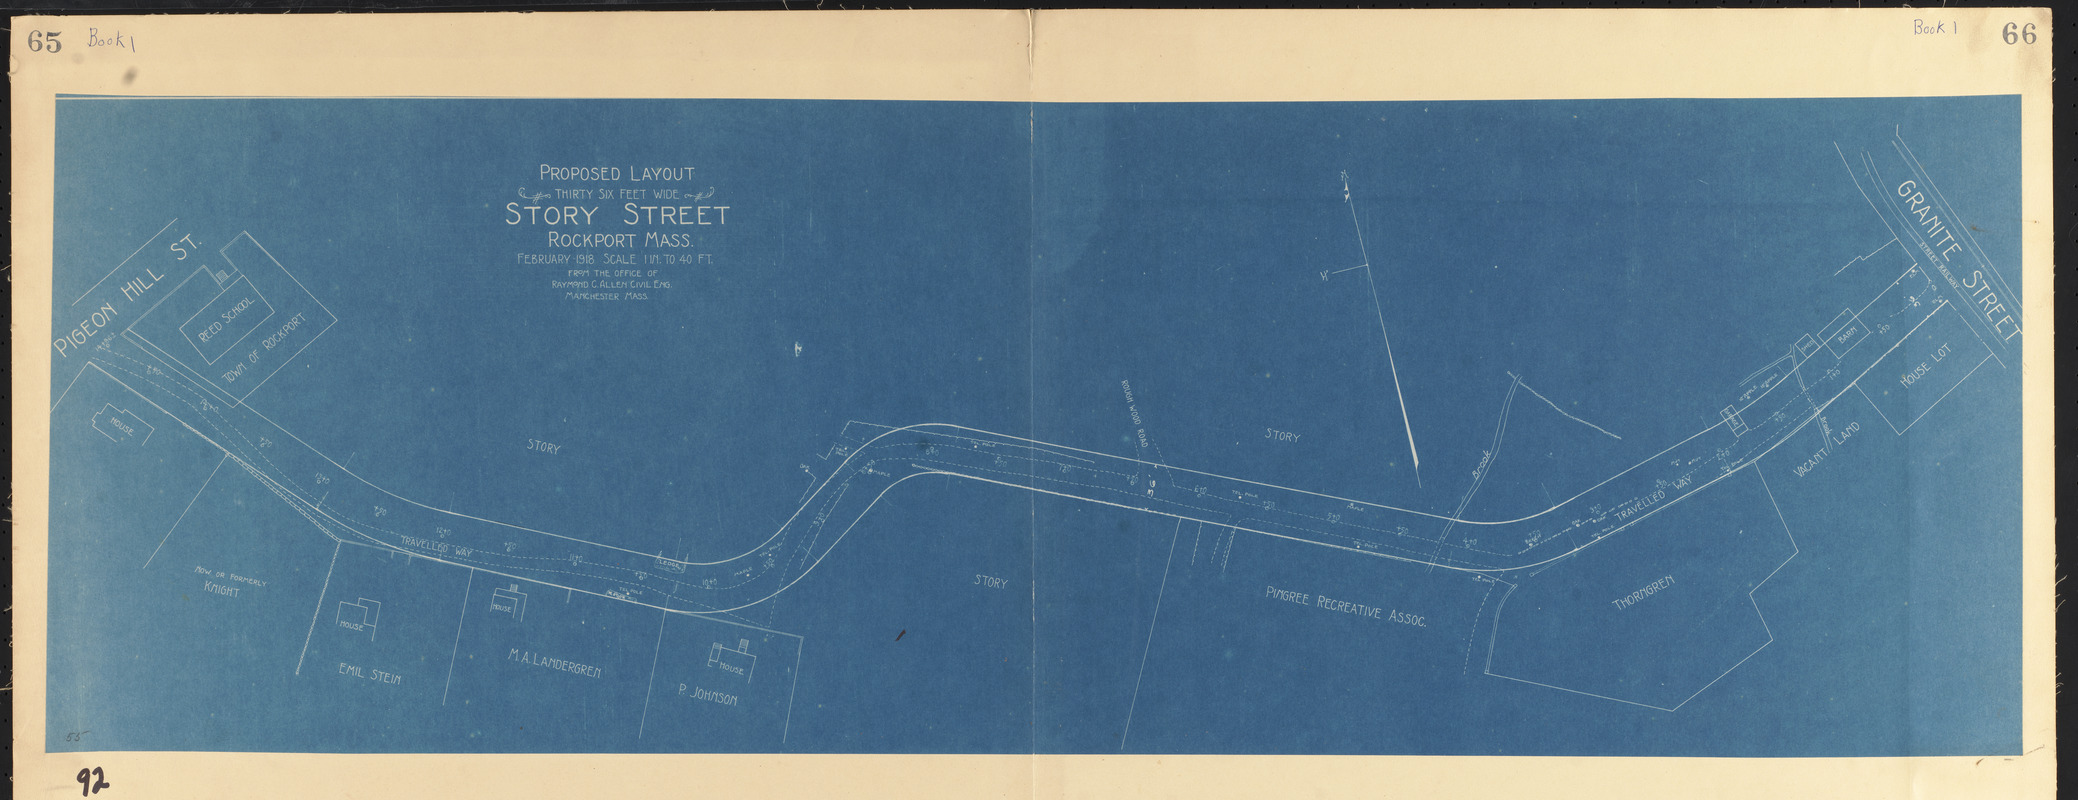 Proposed layout, thirty-six feet wide, Story Street, Rockport, Mass.